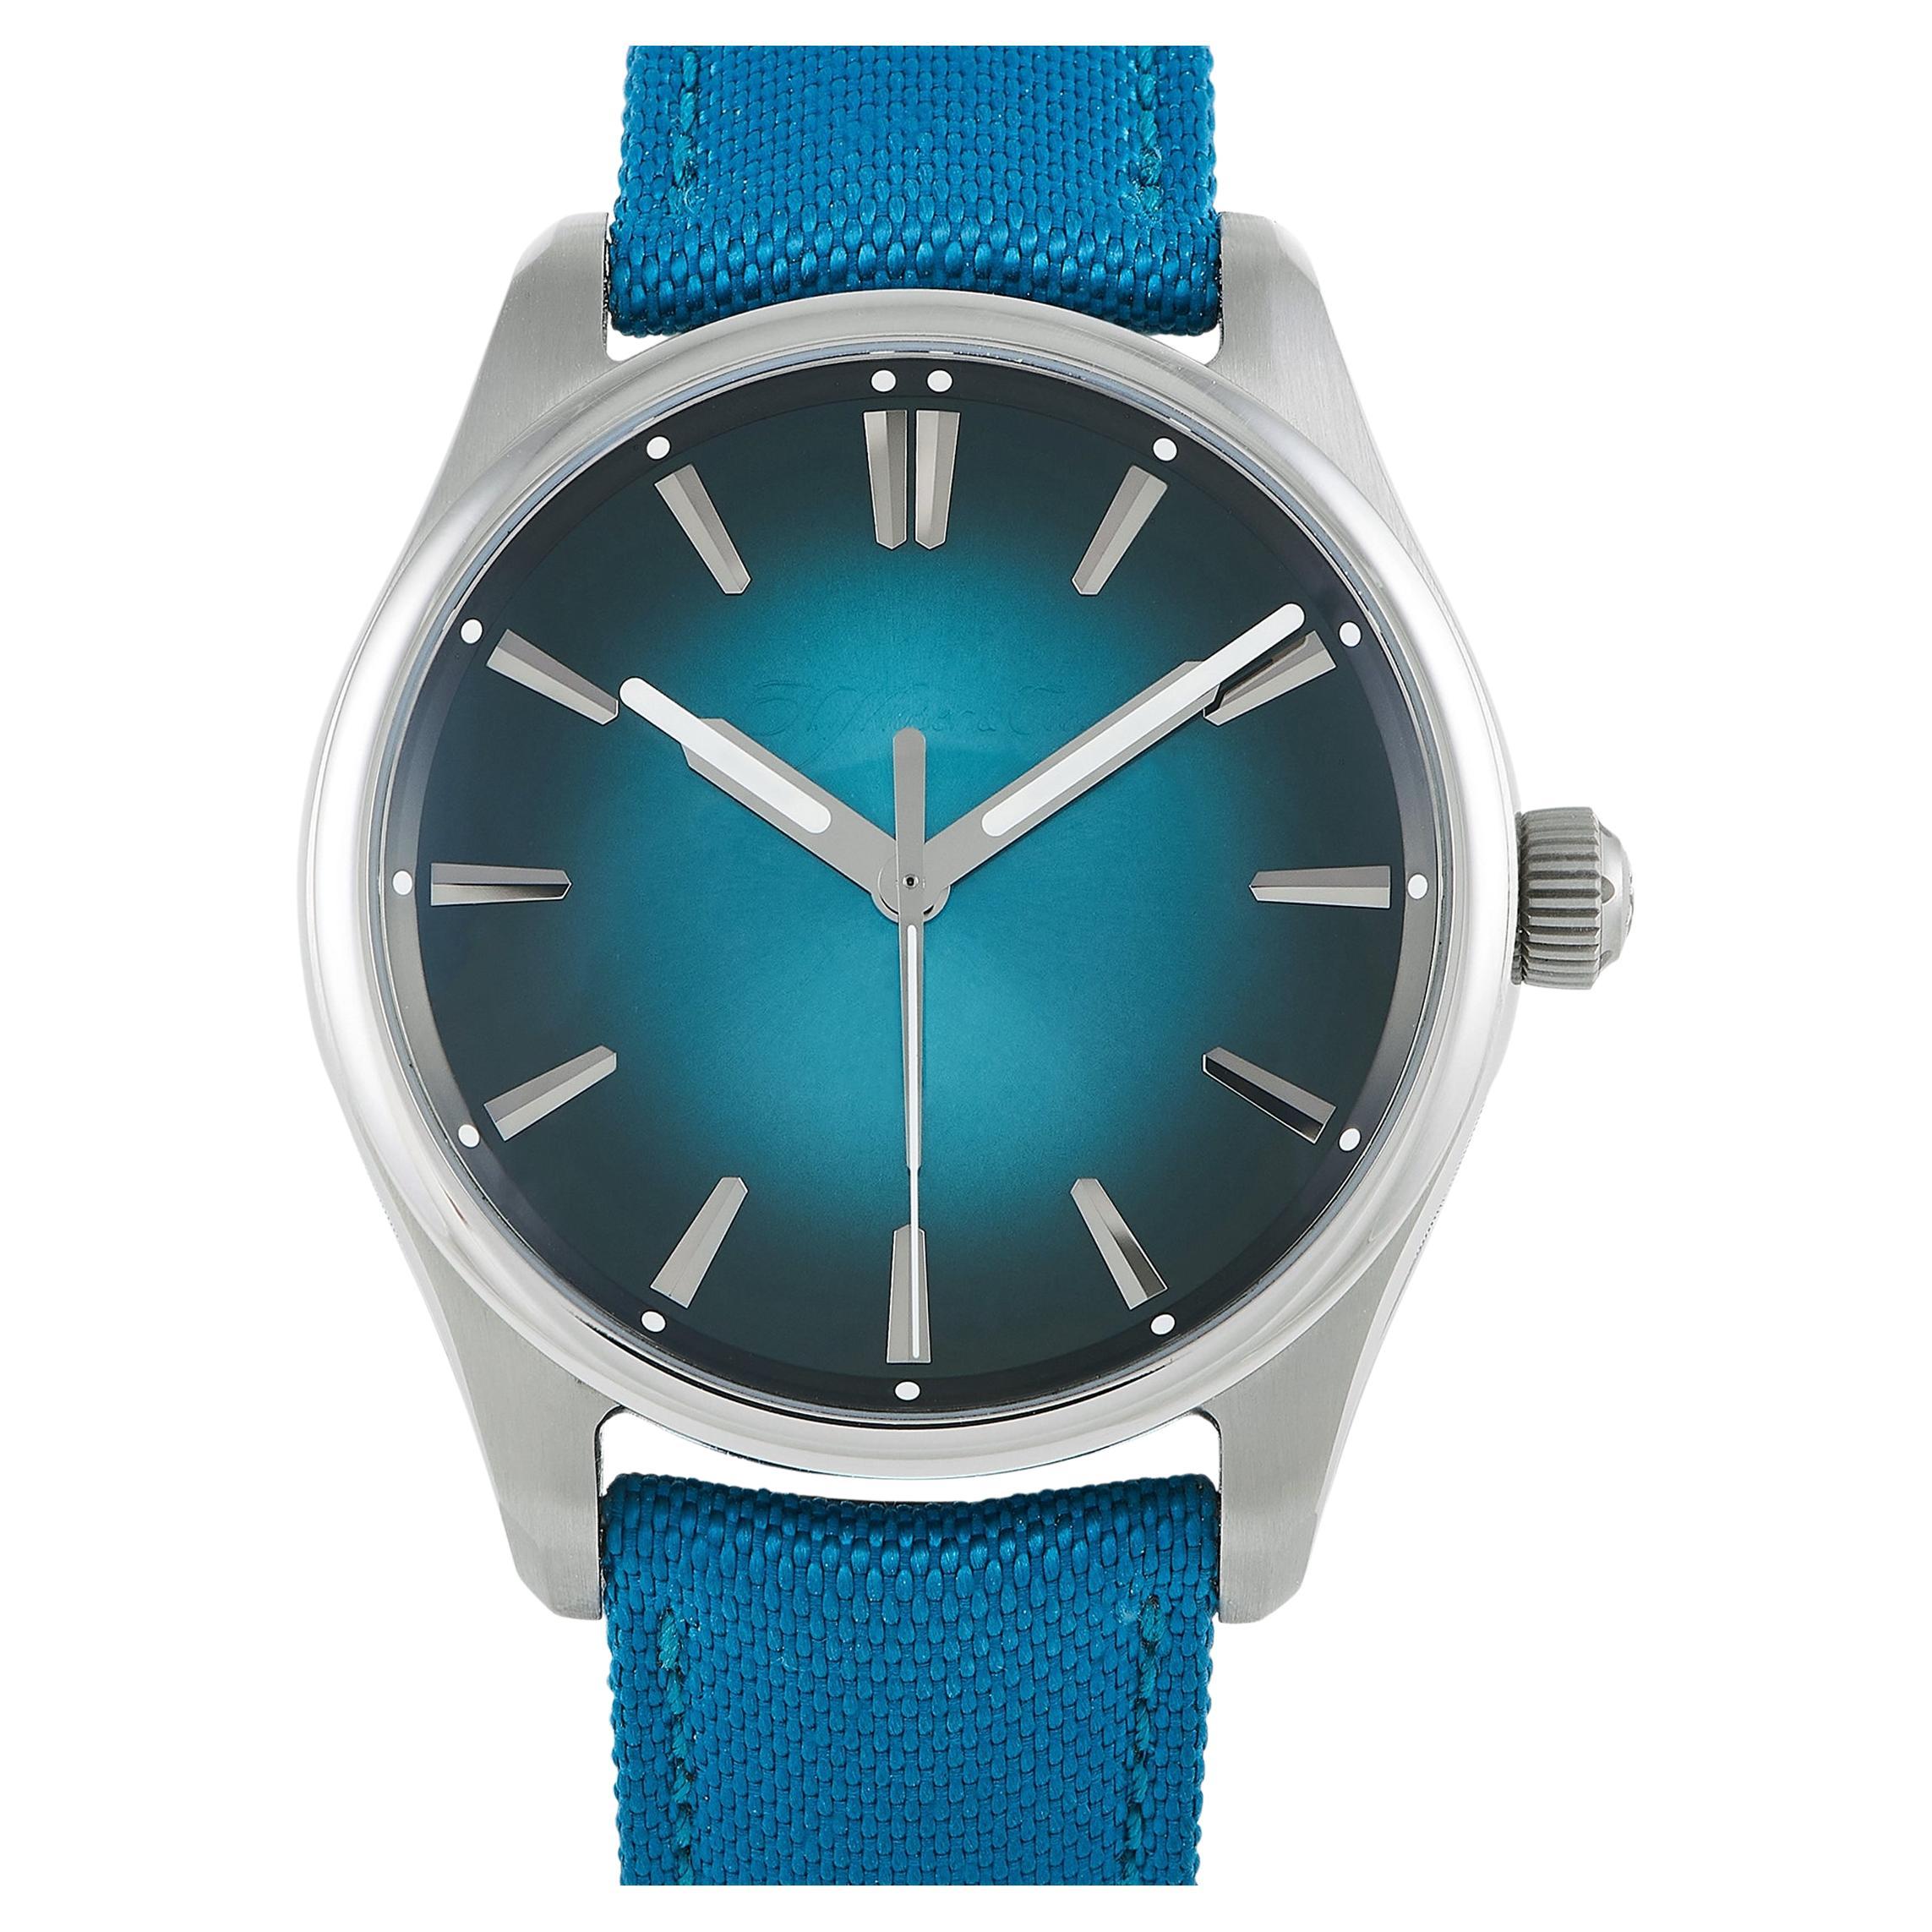 H. Moser & Cie Pioneer Center Seconds Mega Cool Blue Lagoon Watch 3200.1214